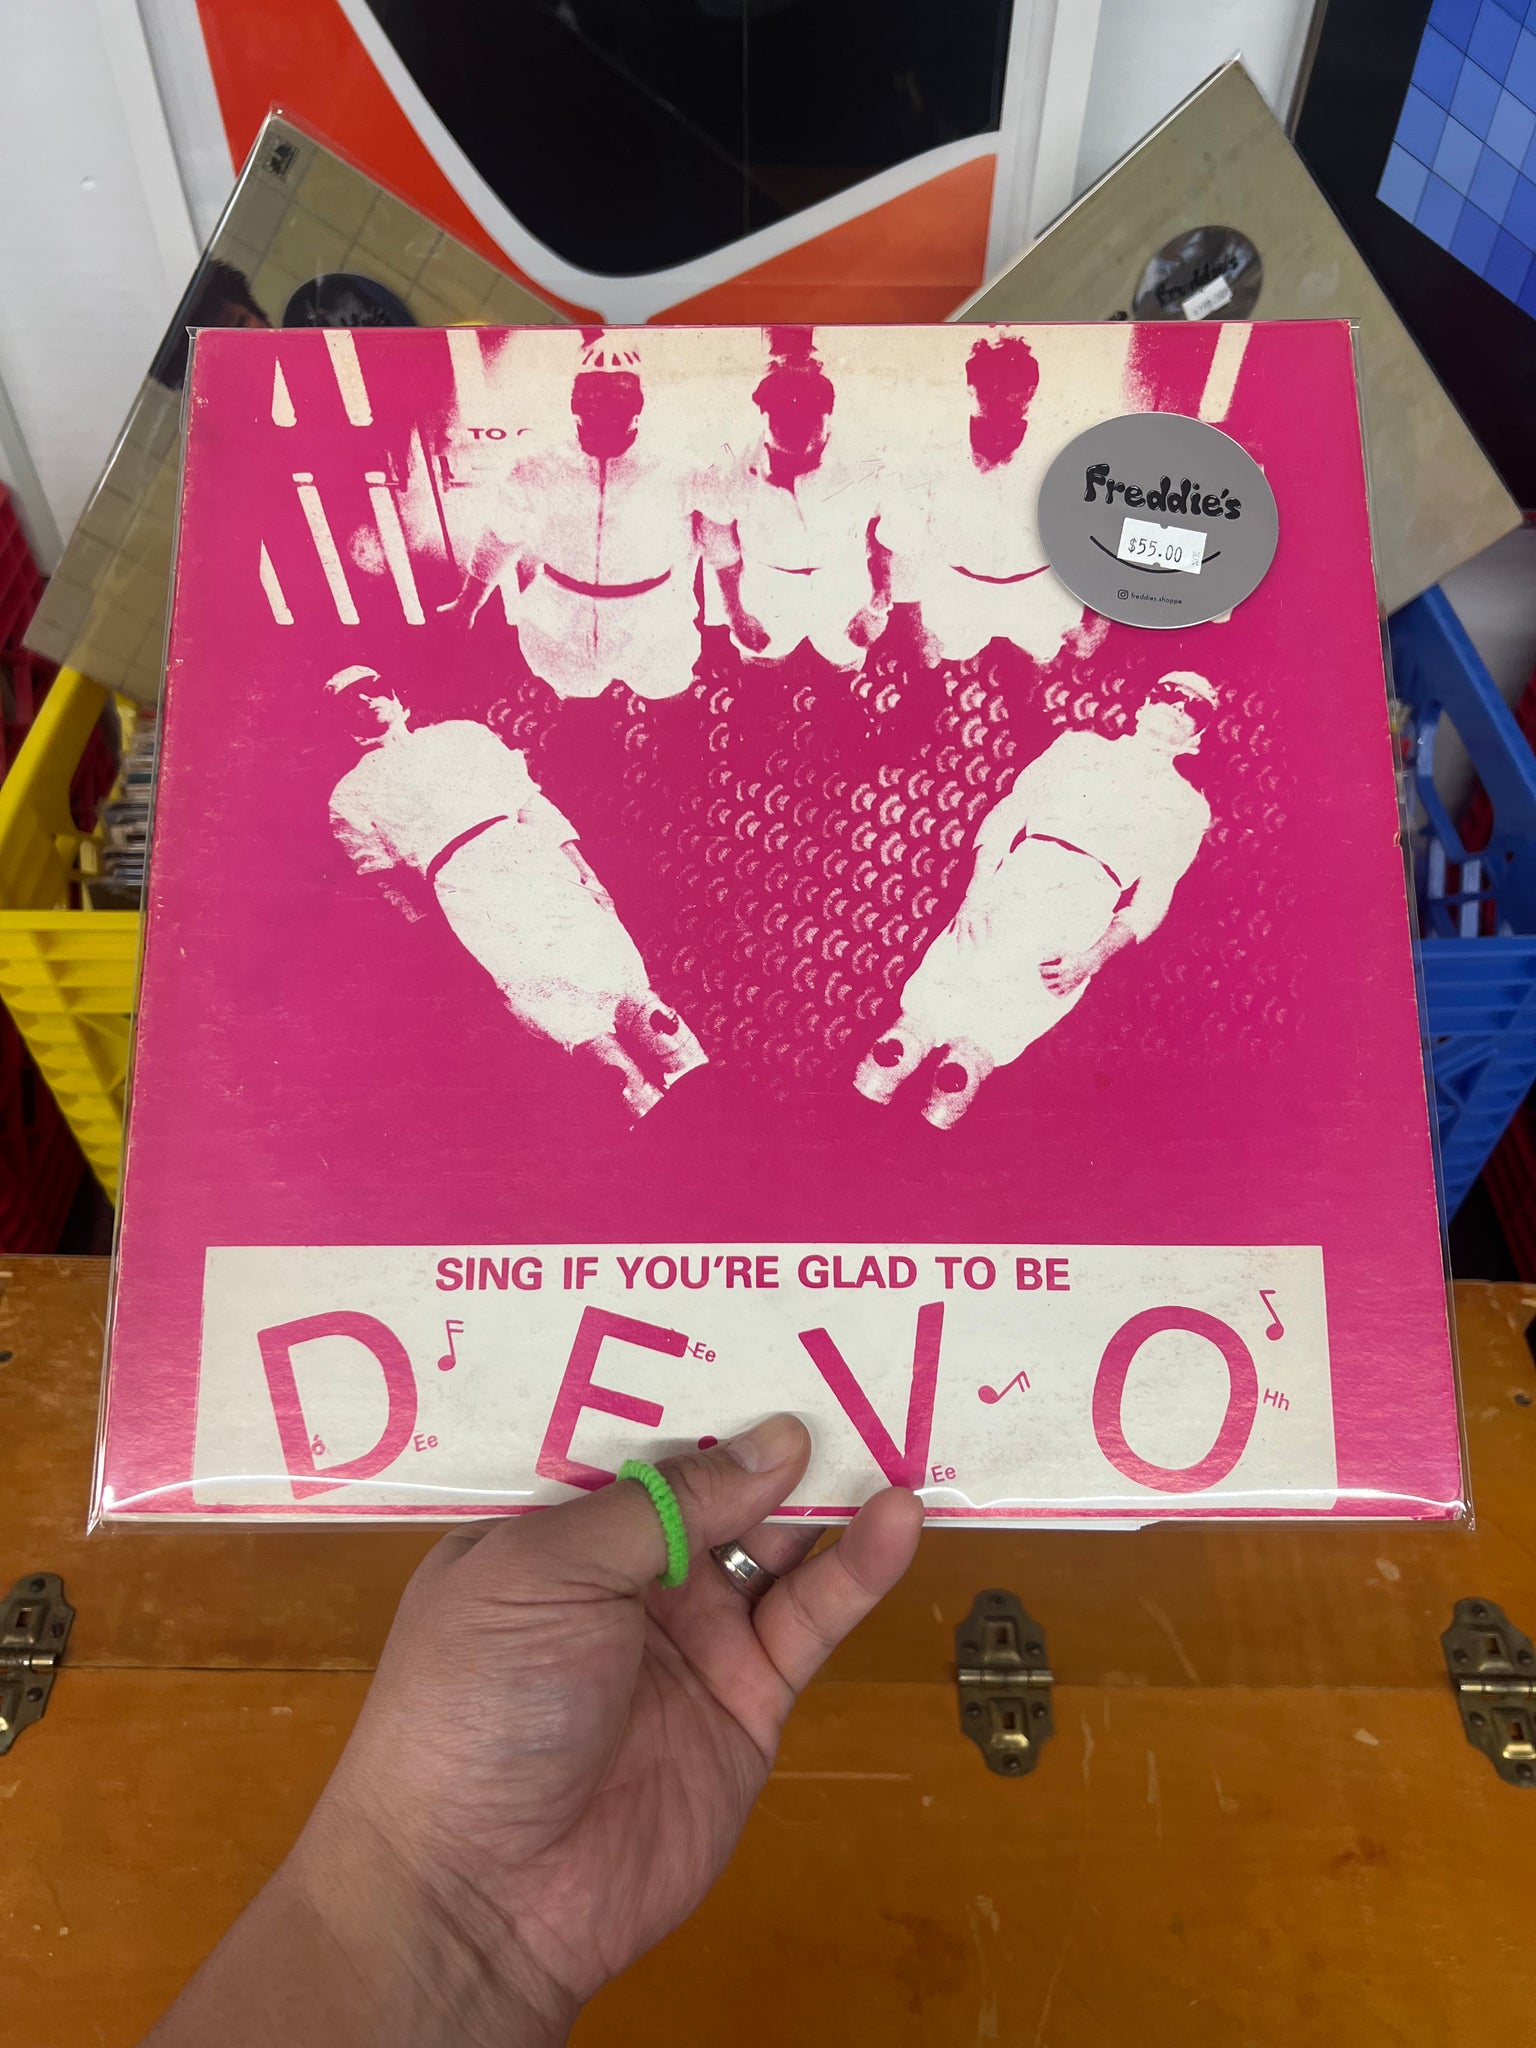 Devo Sing if you’re glad to be BOOTLEG